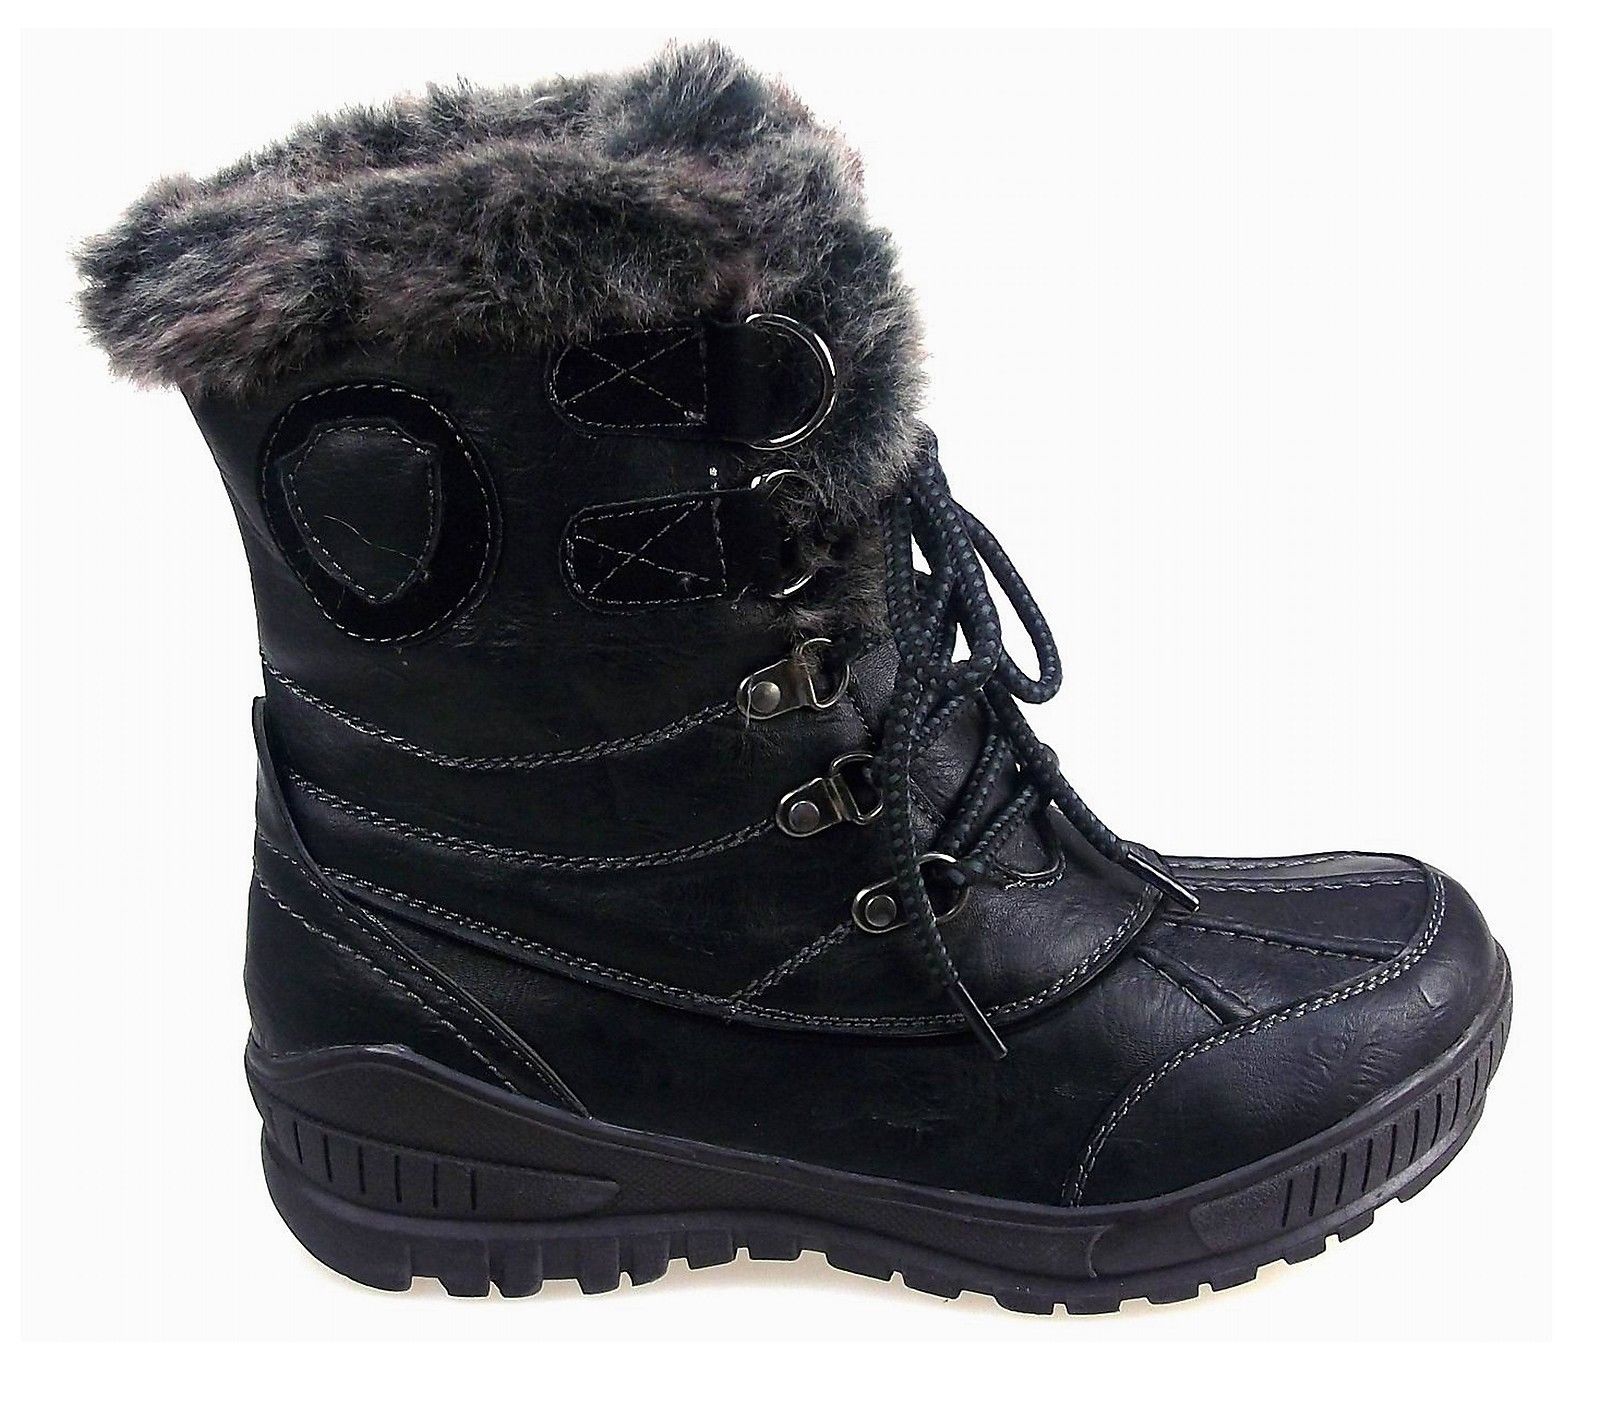 LADIES WOMENS SNOW SKI ANKLE BOOTS WINTER RAIN THERMAL - FULLY FUR LINED SIZES